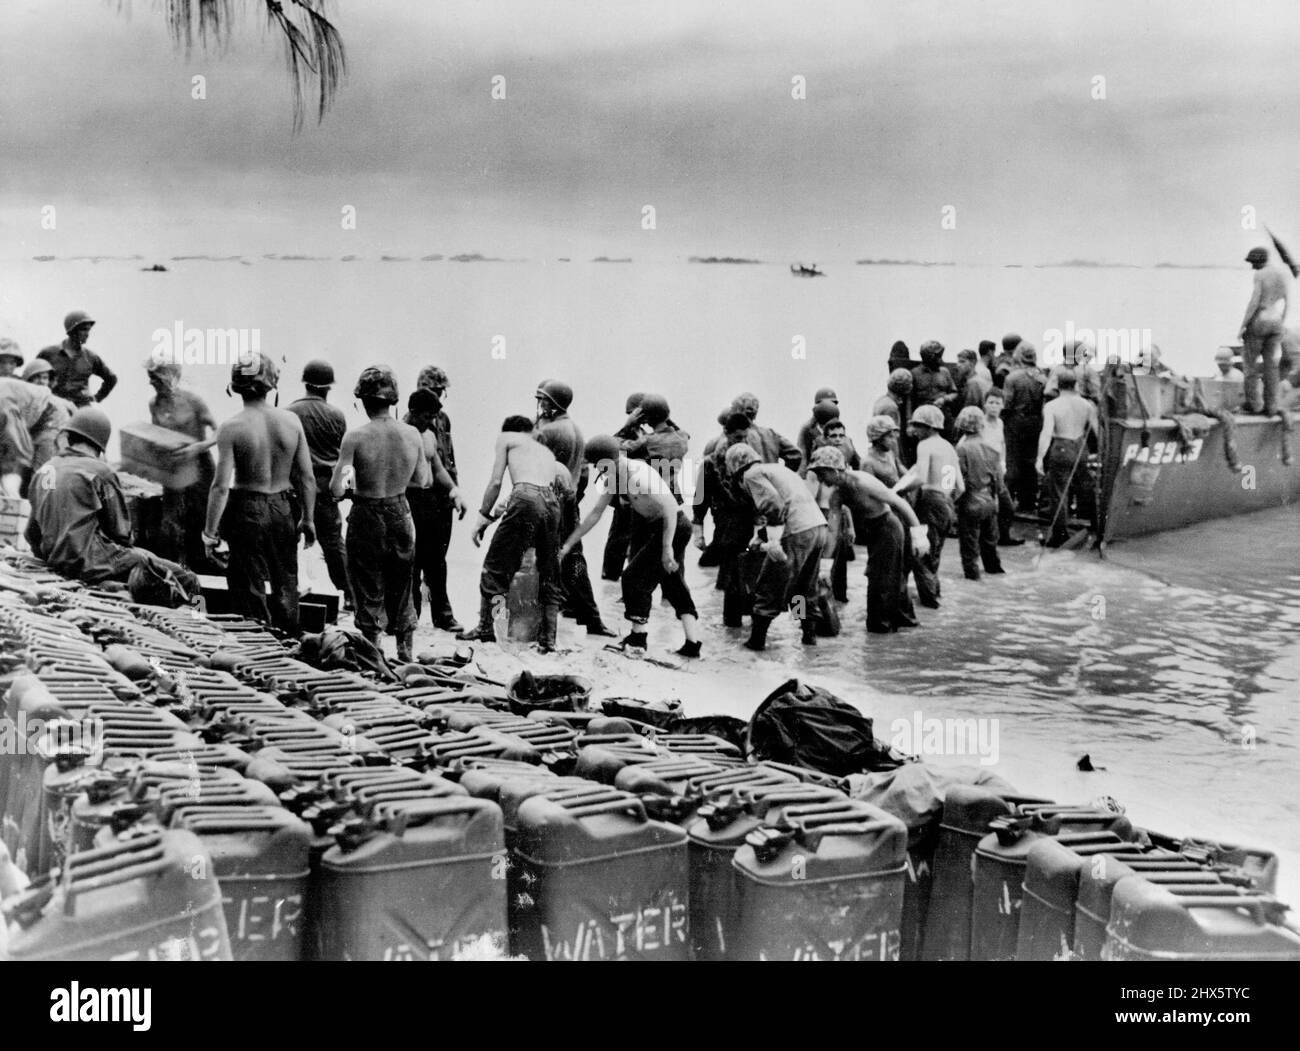 Bucket Brigade - These Marines line up, on the beach on Saipan Island, to speed the unloading of supplies and water cane. Row on row of cans filled with much needed water await transportation to interior. U. S. ships and landing craft stand by to bring in supplies, and safeguard beach. July 13, 1944. (Photo by Official U. S. Marine Corps Photograph) Stock Photo